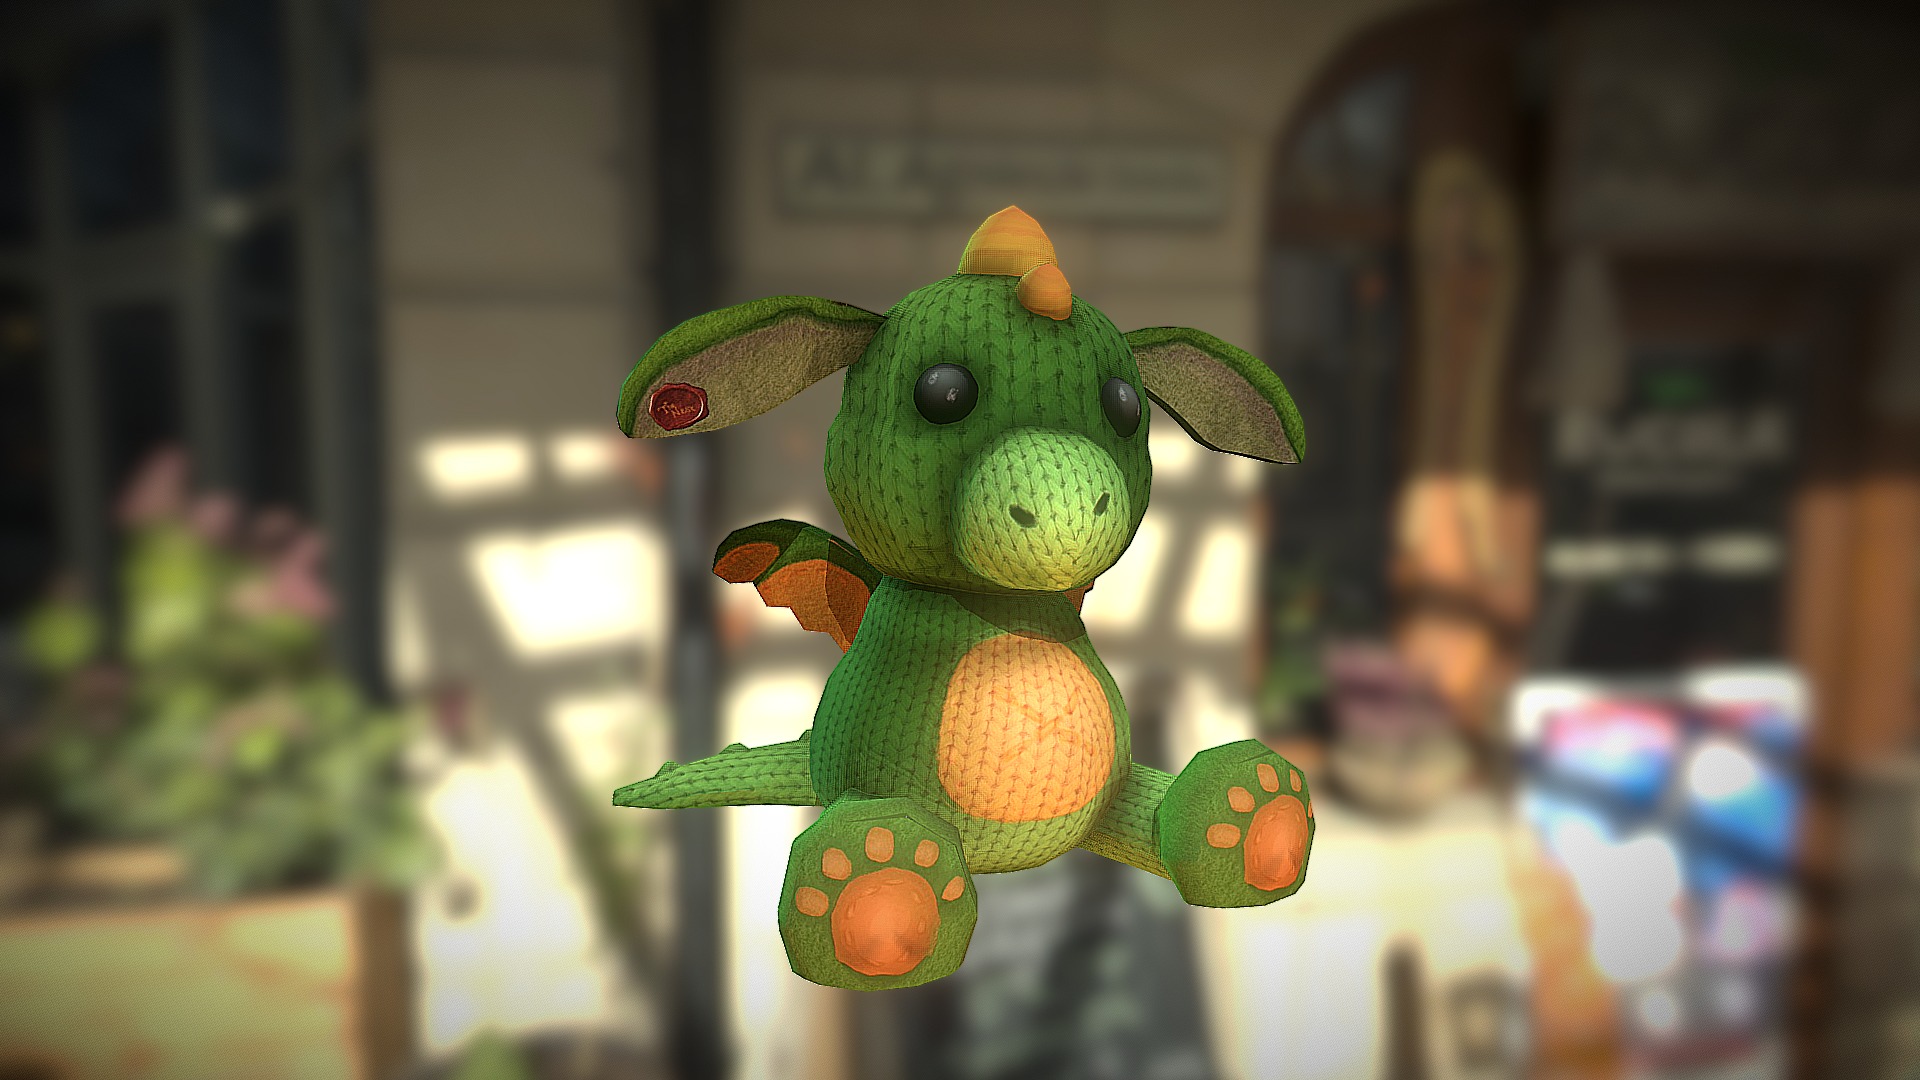 3D model Dragon Plush - This is a 3D model of the Dragon Plush. The 3D model is about a green and yellow stuffed animal.